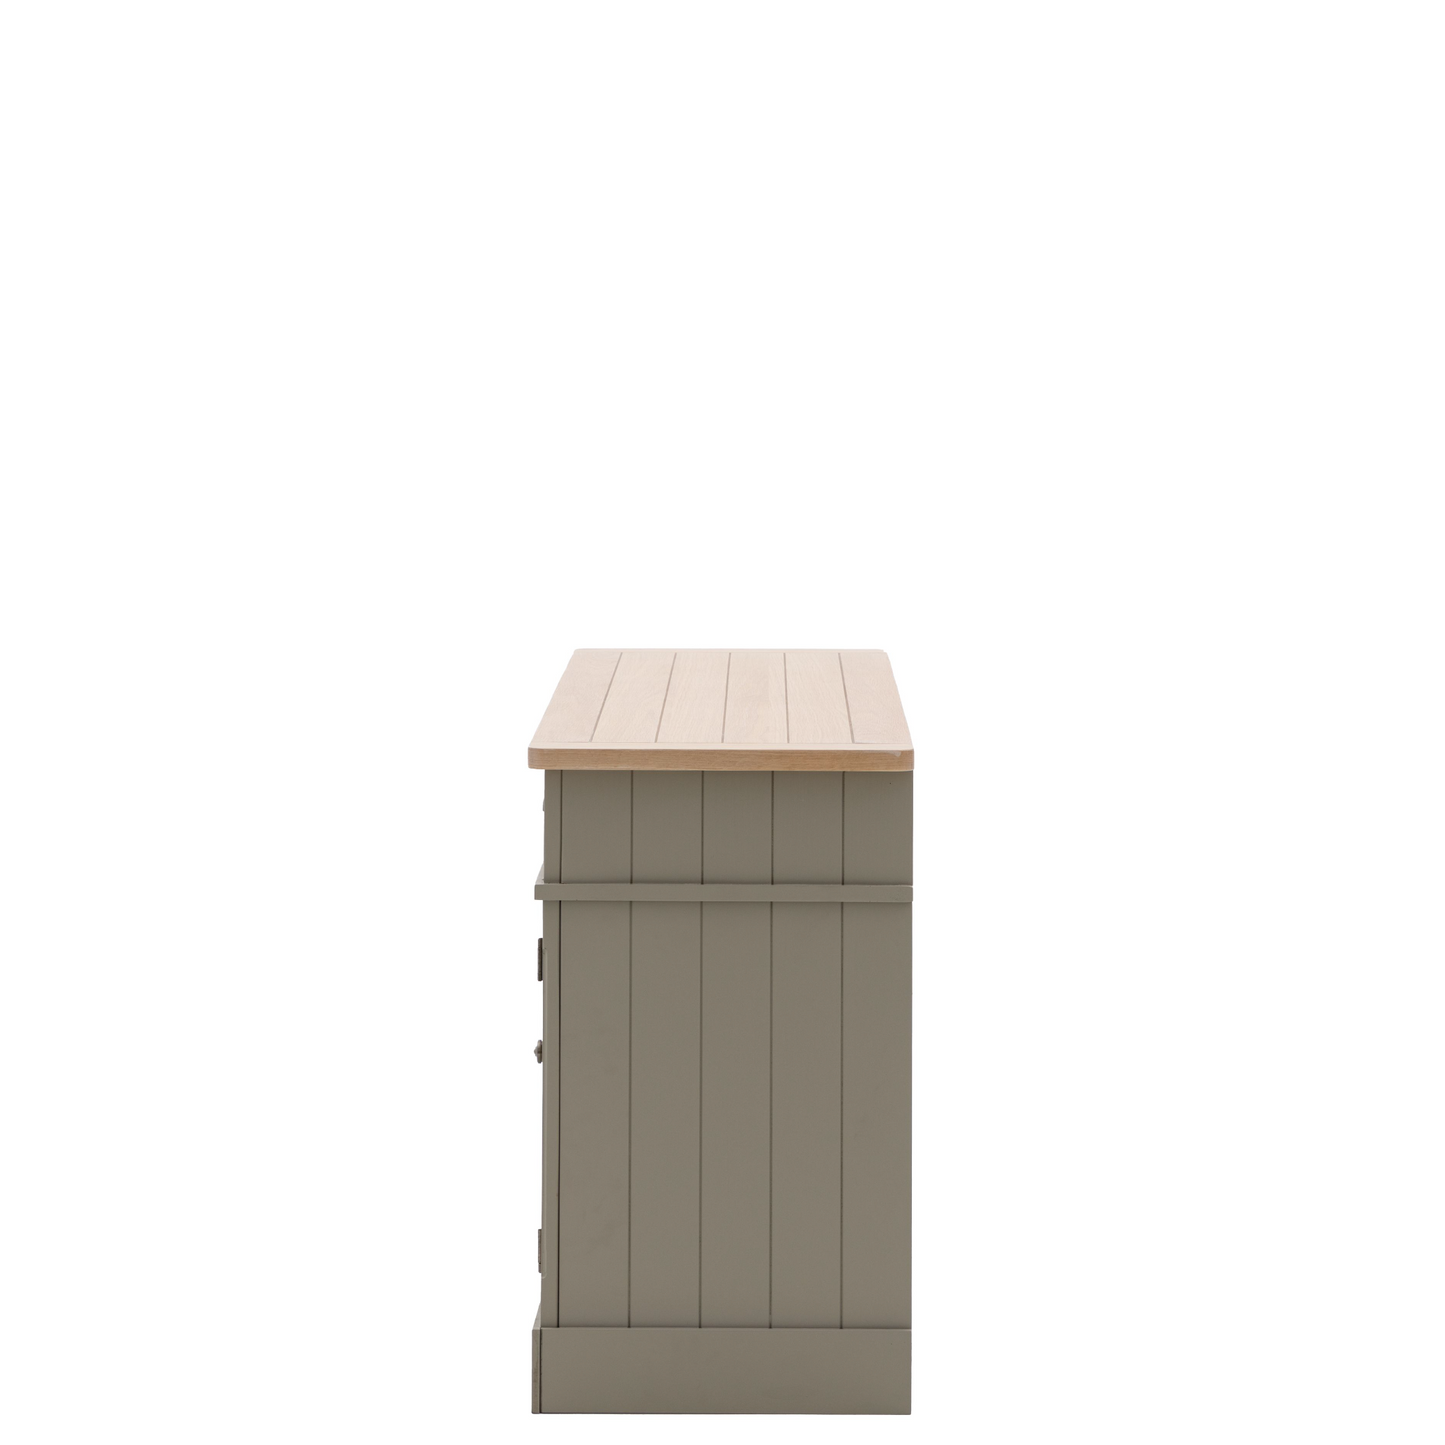 A Prairie sideboard in Buckland finish 1400x450x800mm by Kikiathome.co.uk, perfect for interior decor.